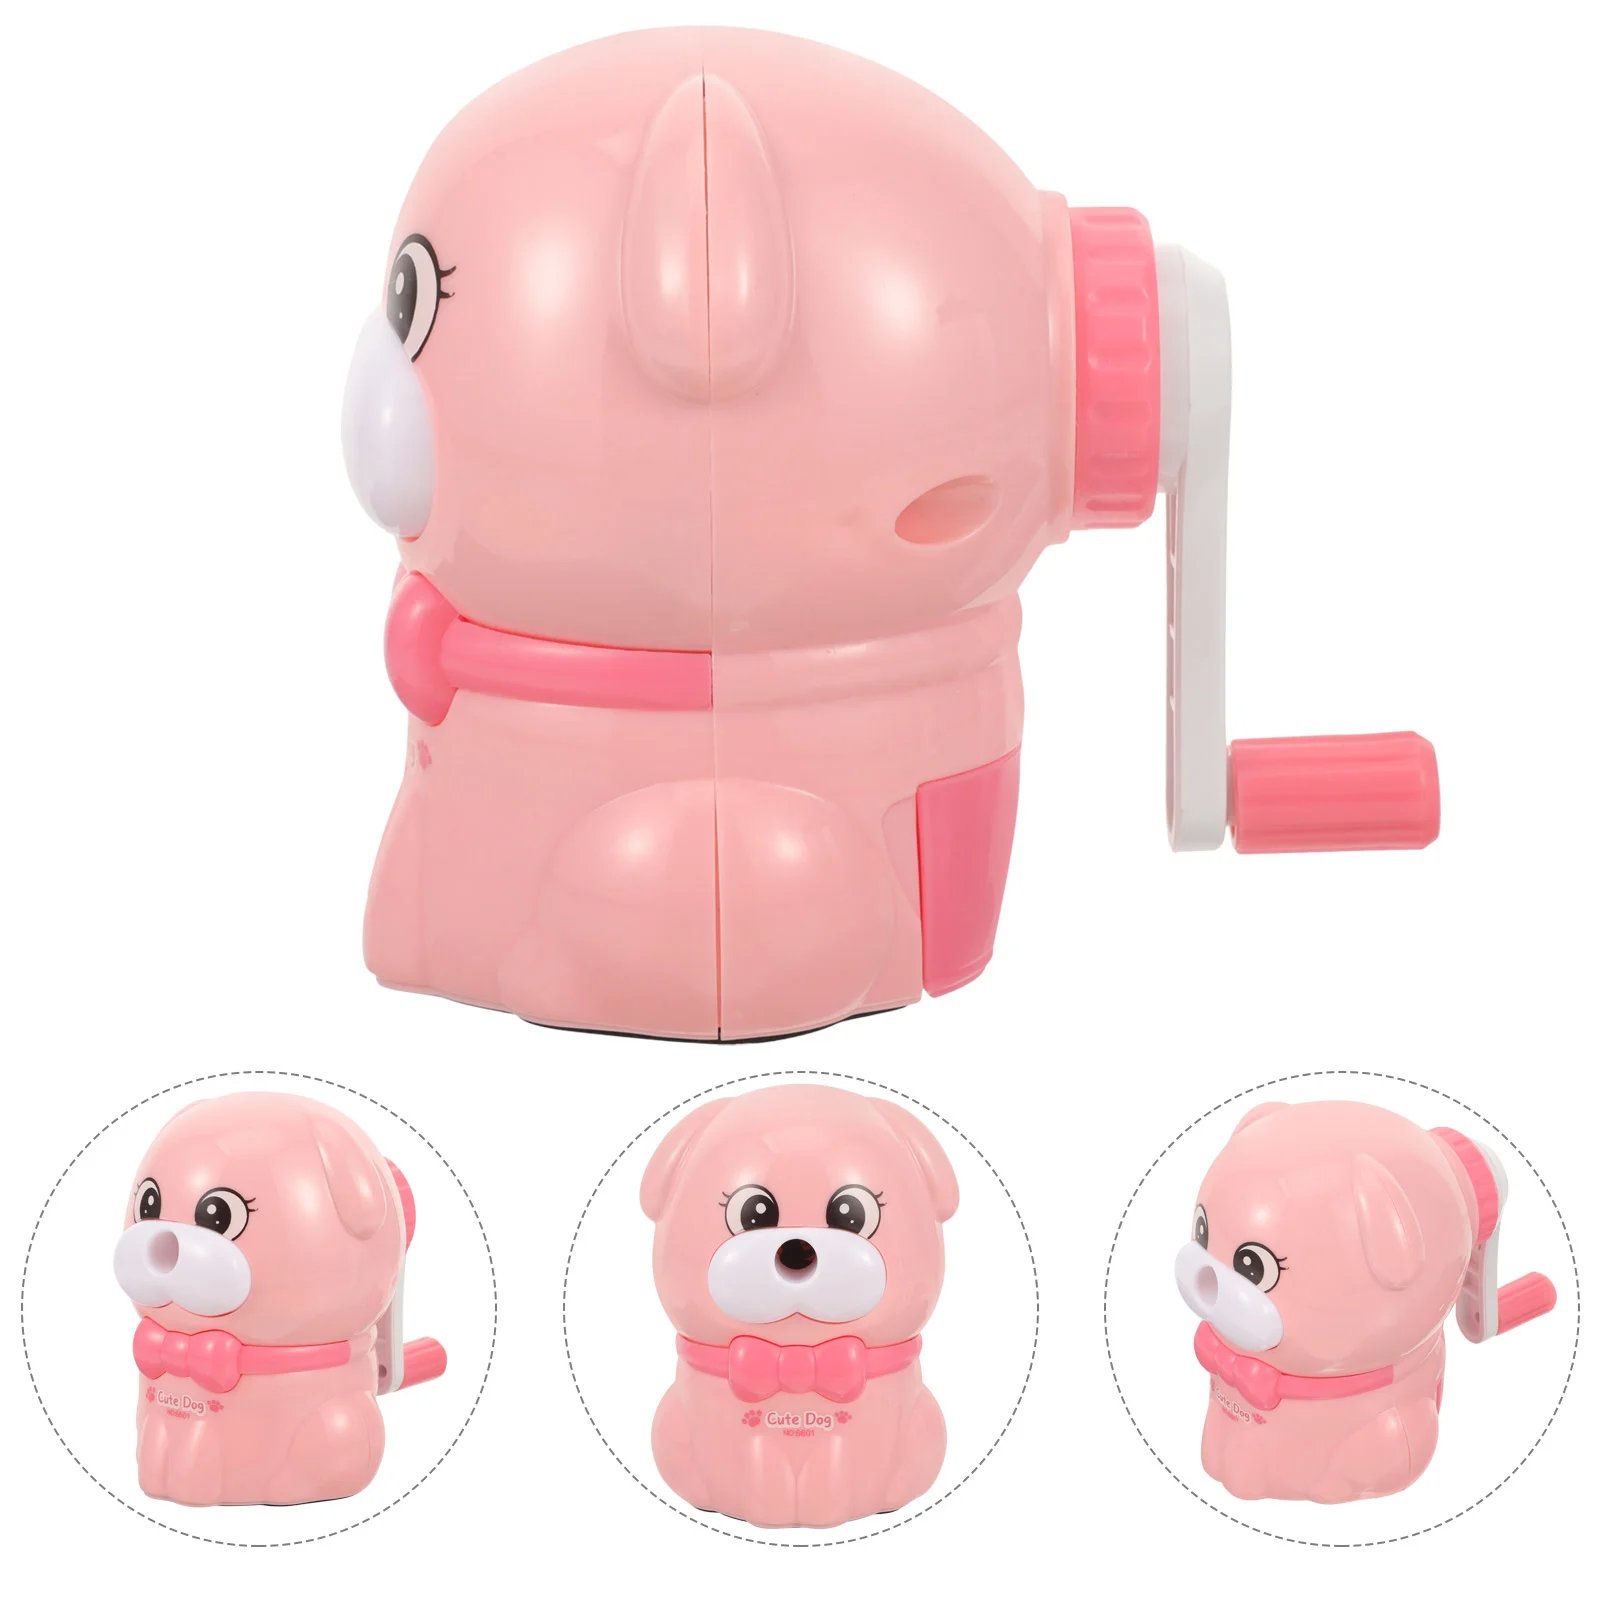 

Puppy Pencil Sharpener Kids Stationary Adorable Dog Sharpeners Accessory Small Manual Lovely Plastic Convenient for